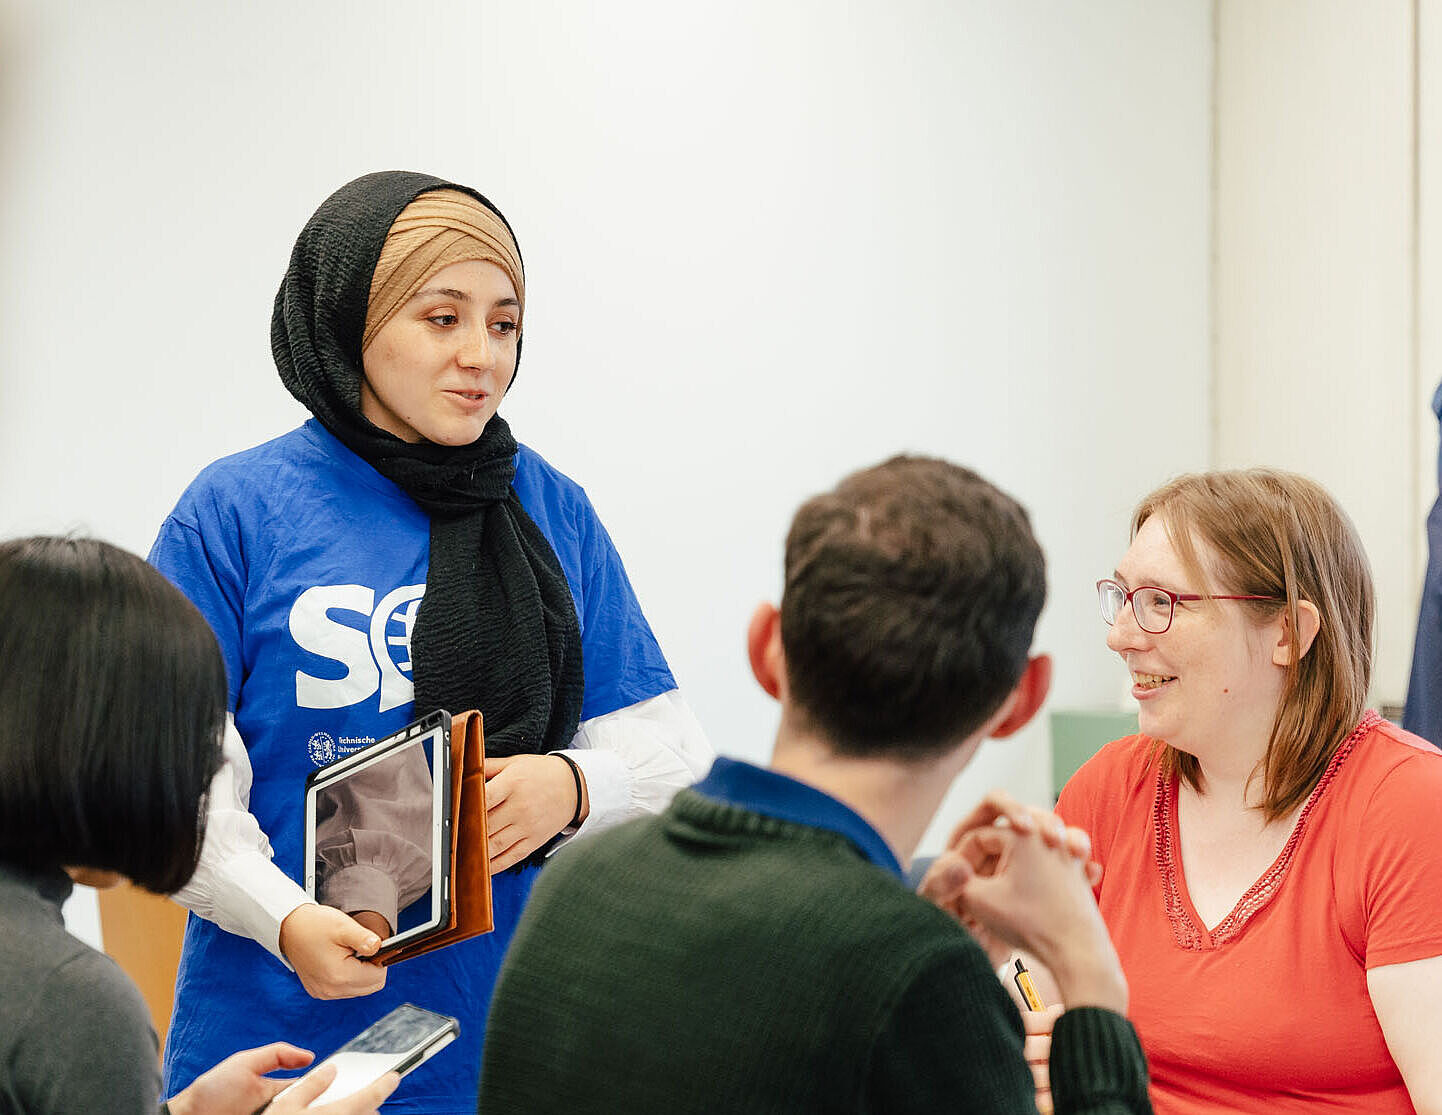 A student from the S.o.S. team chats with international students